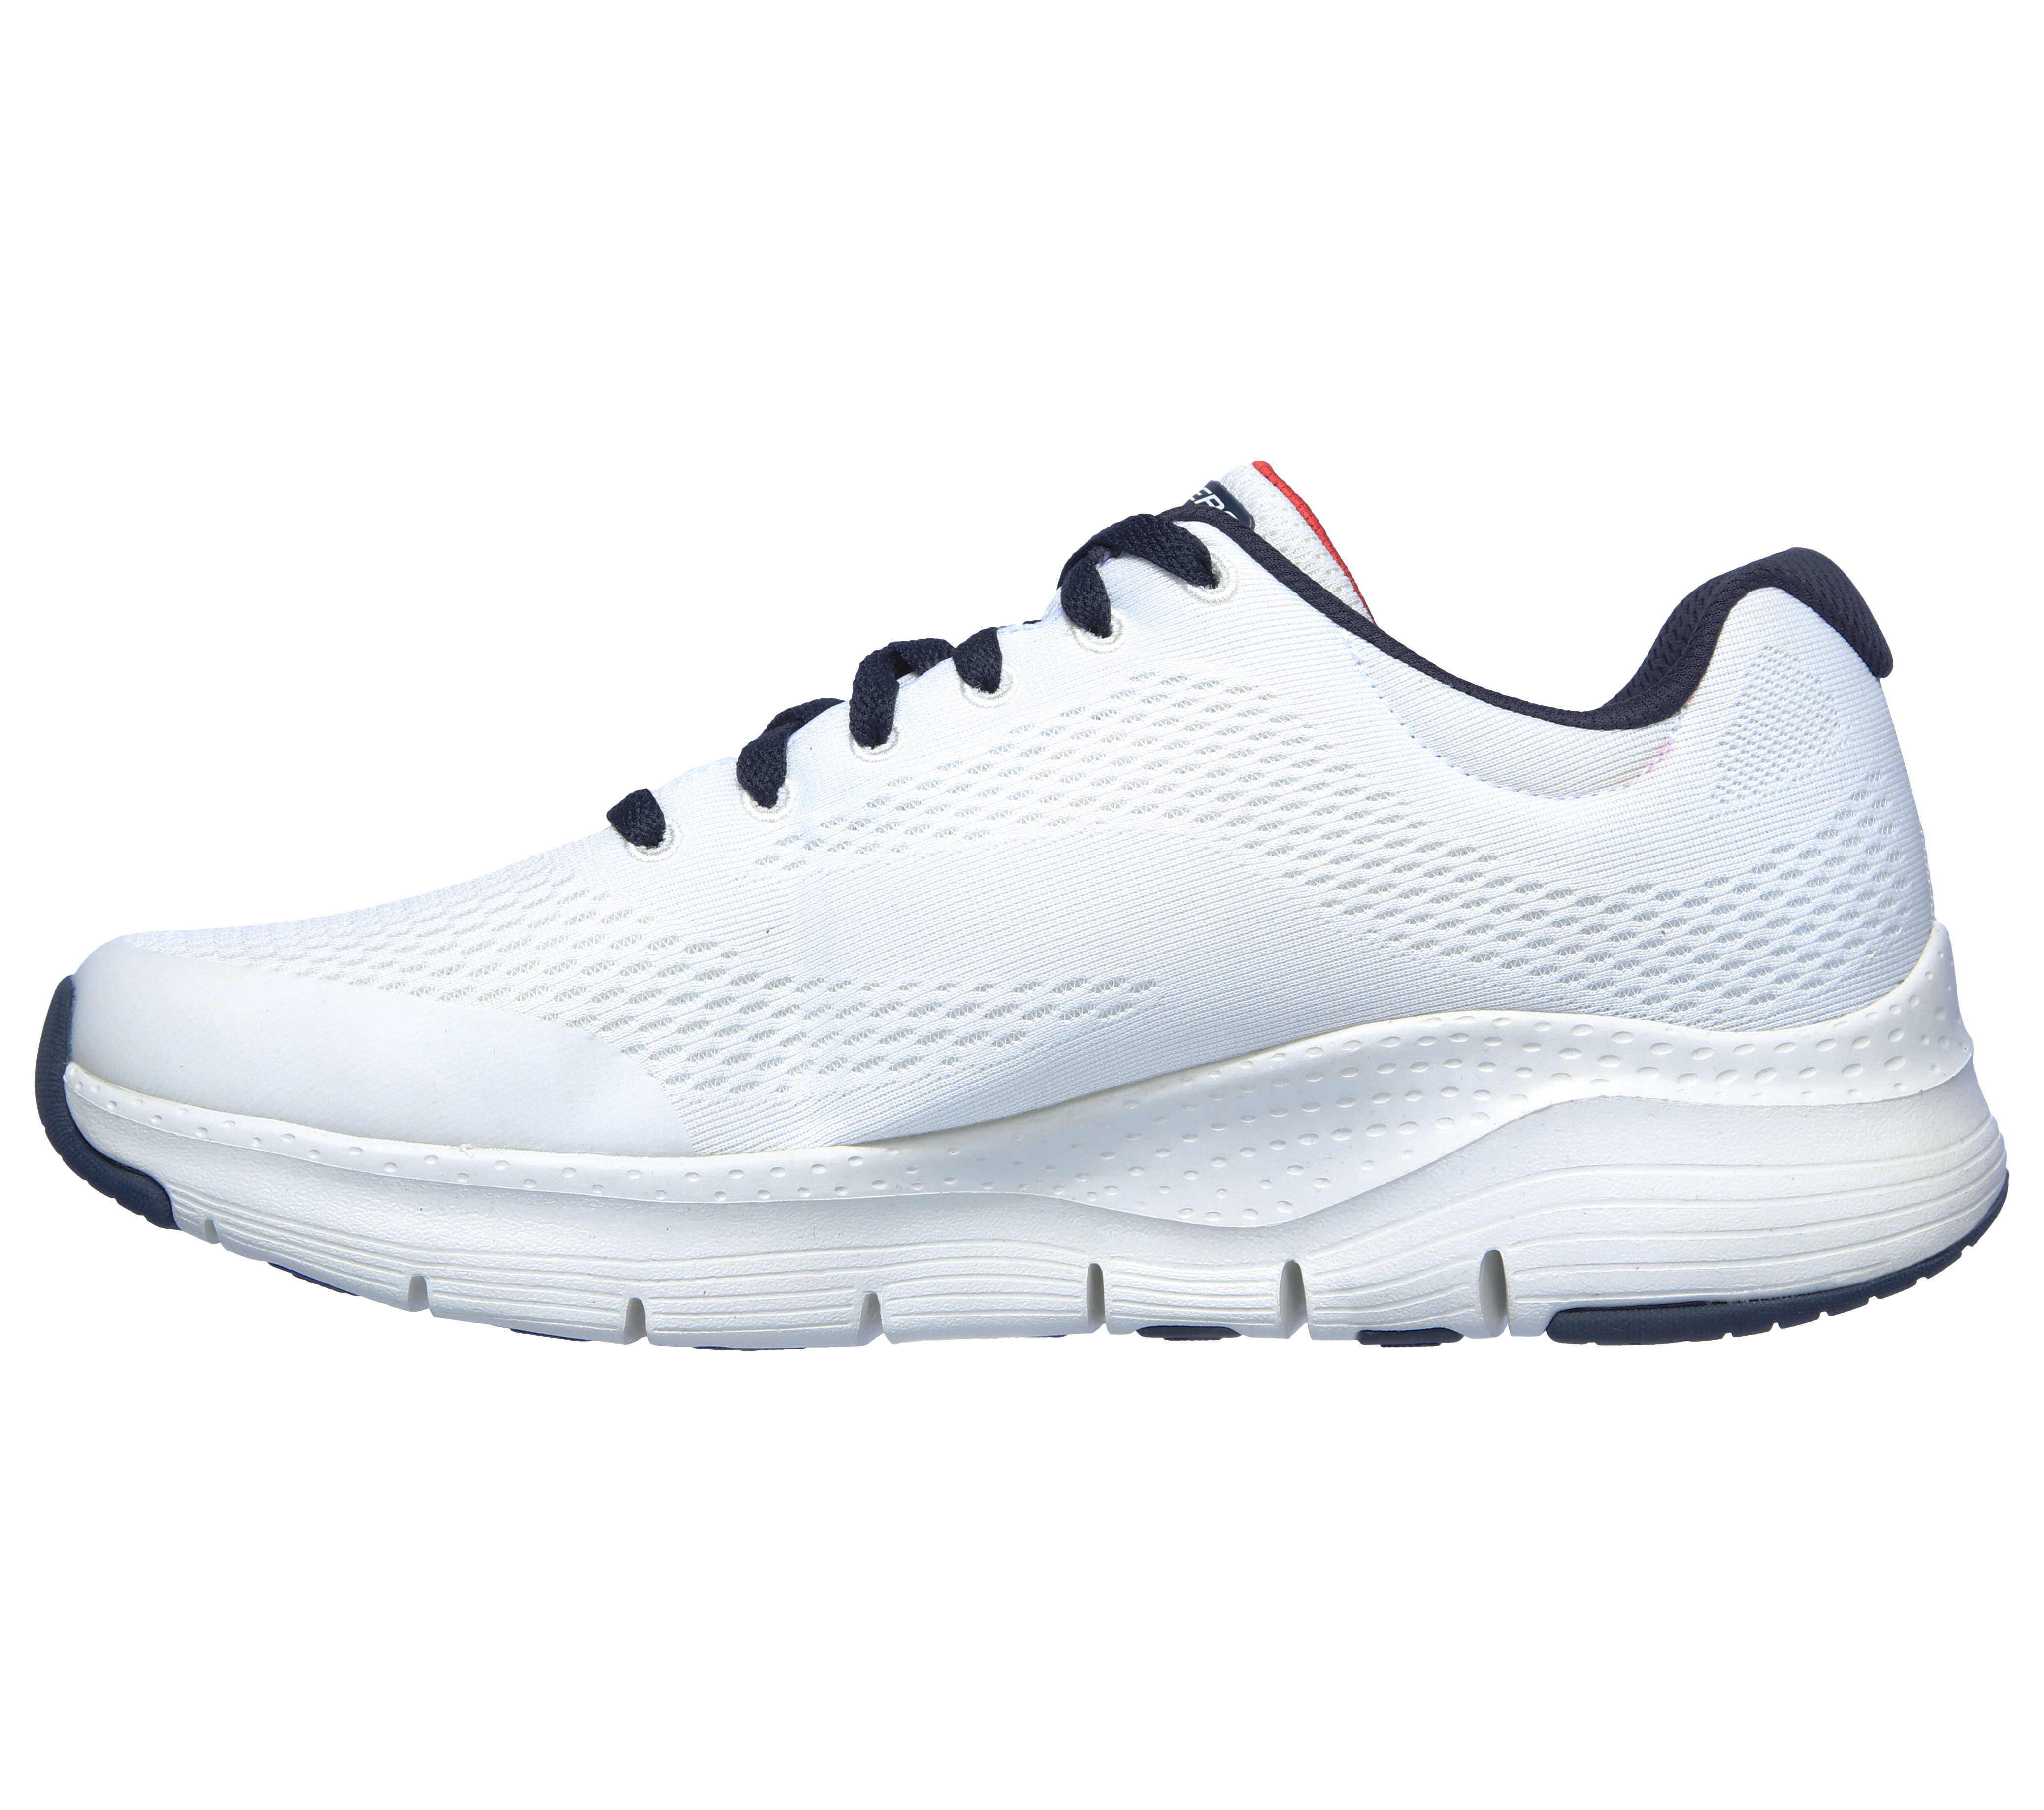 skechers high arch support